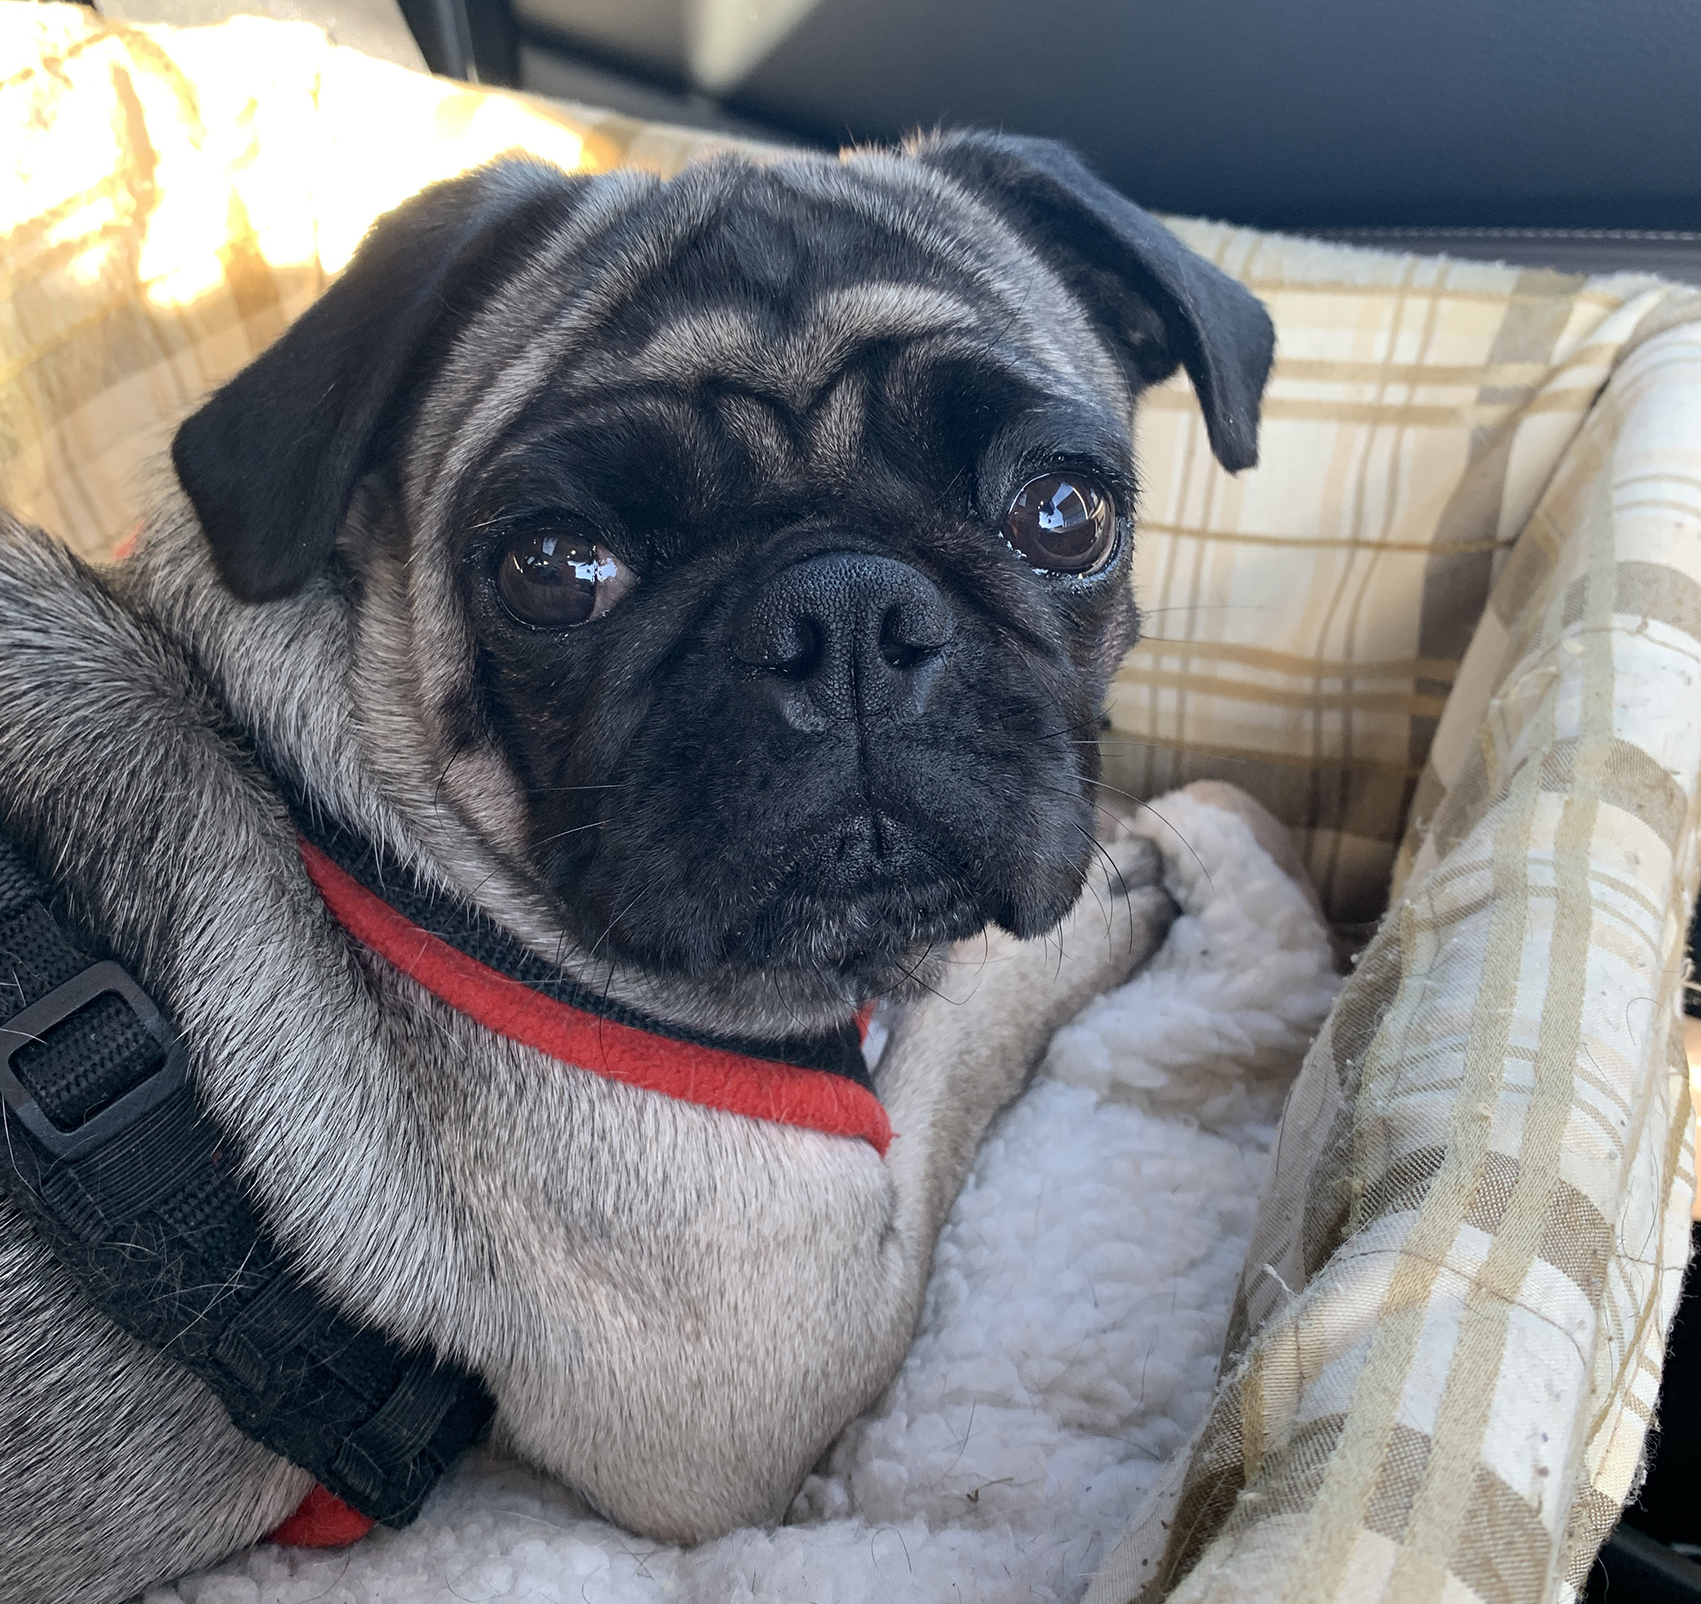 Adoption for Daisy - image Wilma on https://pugprotectiontrust.org